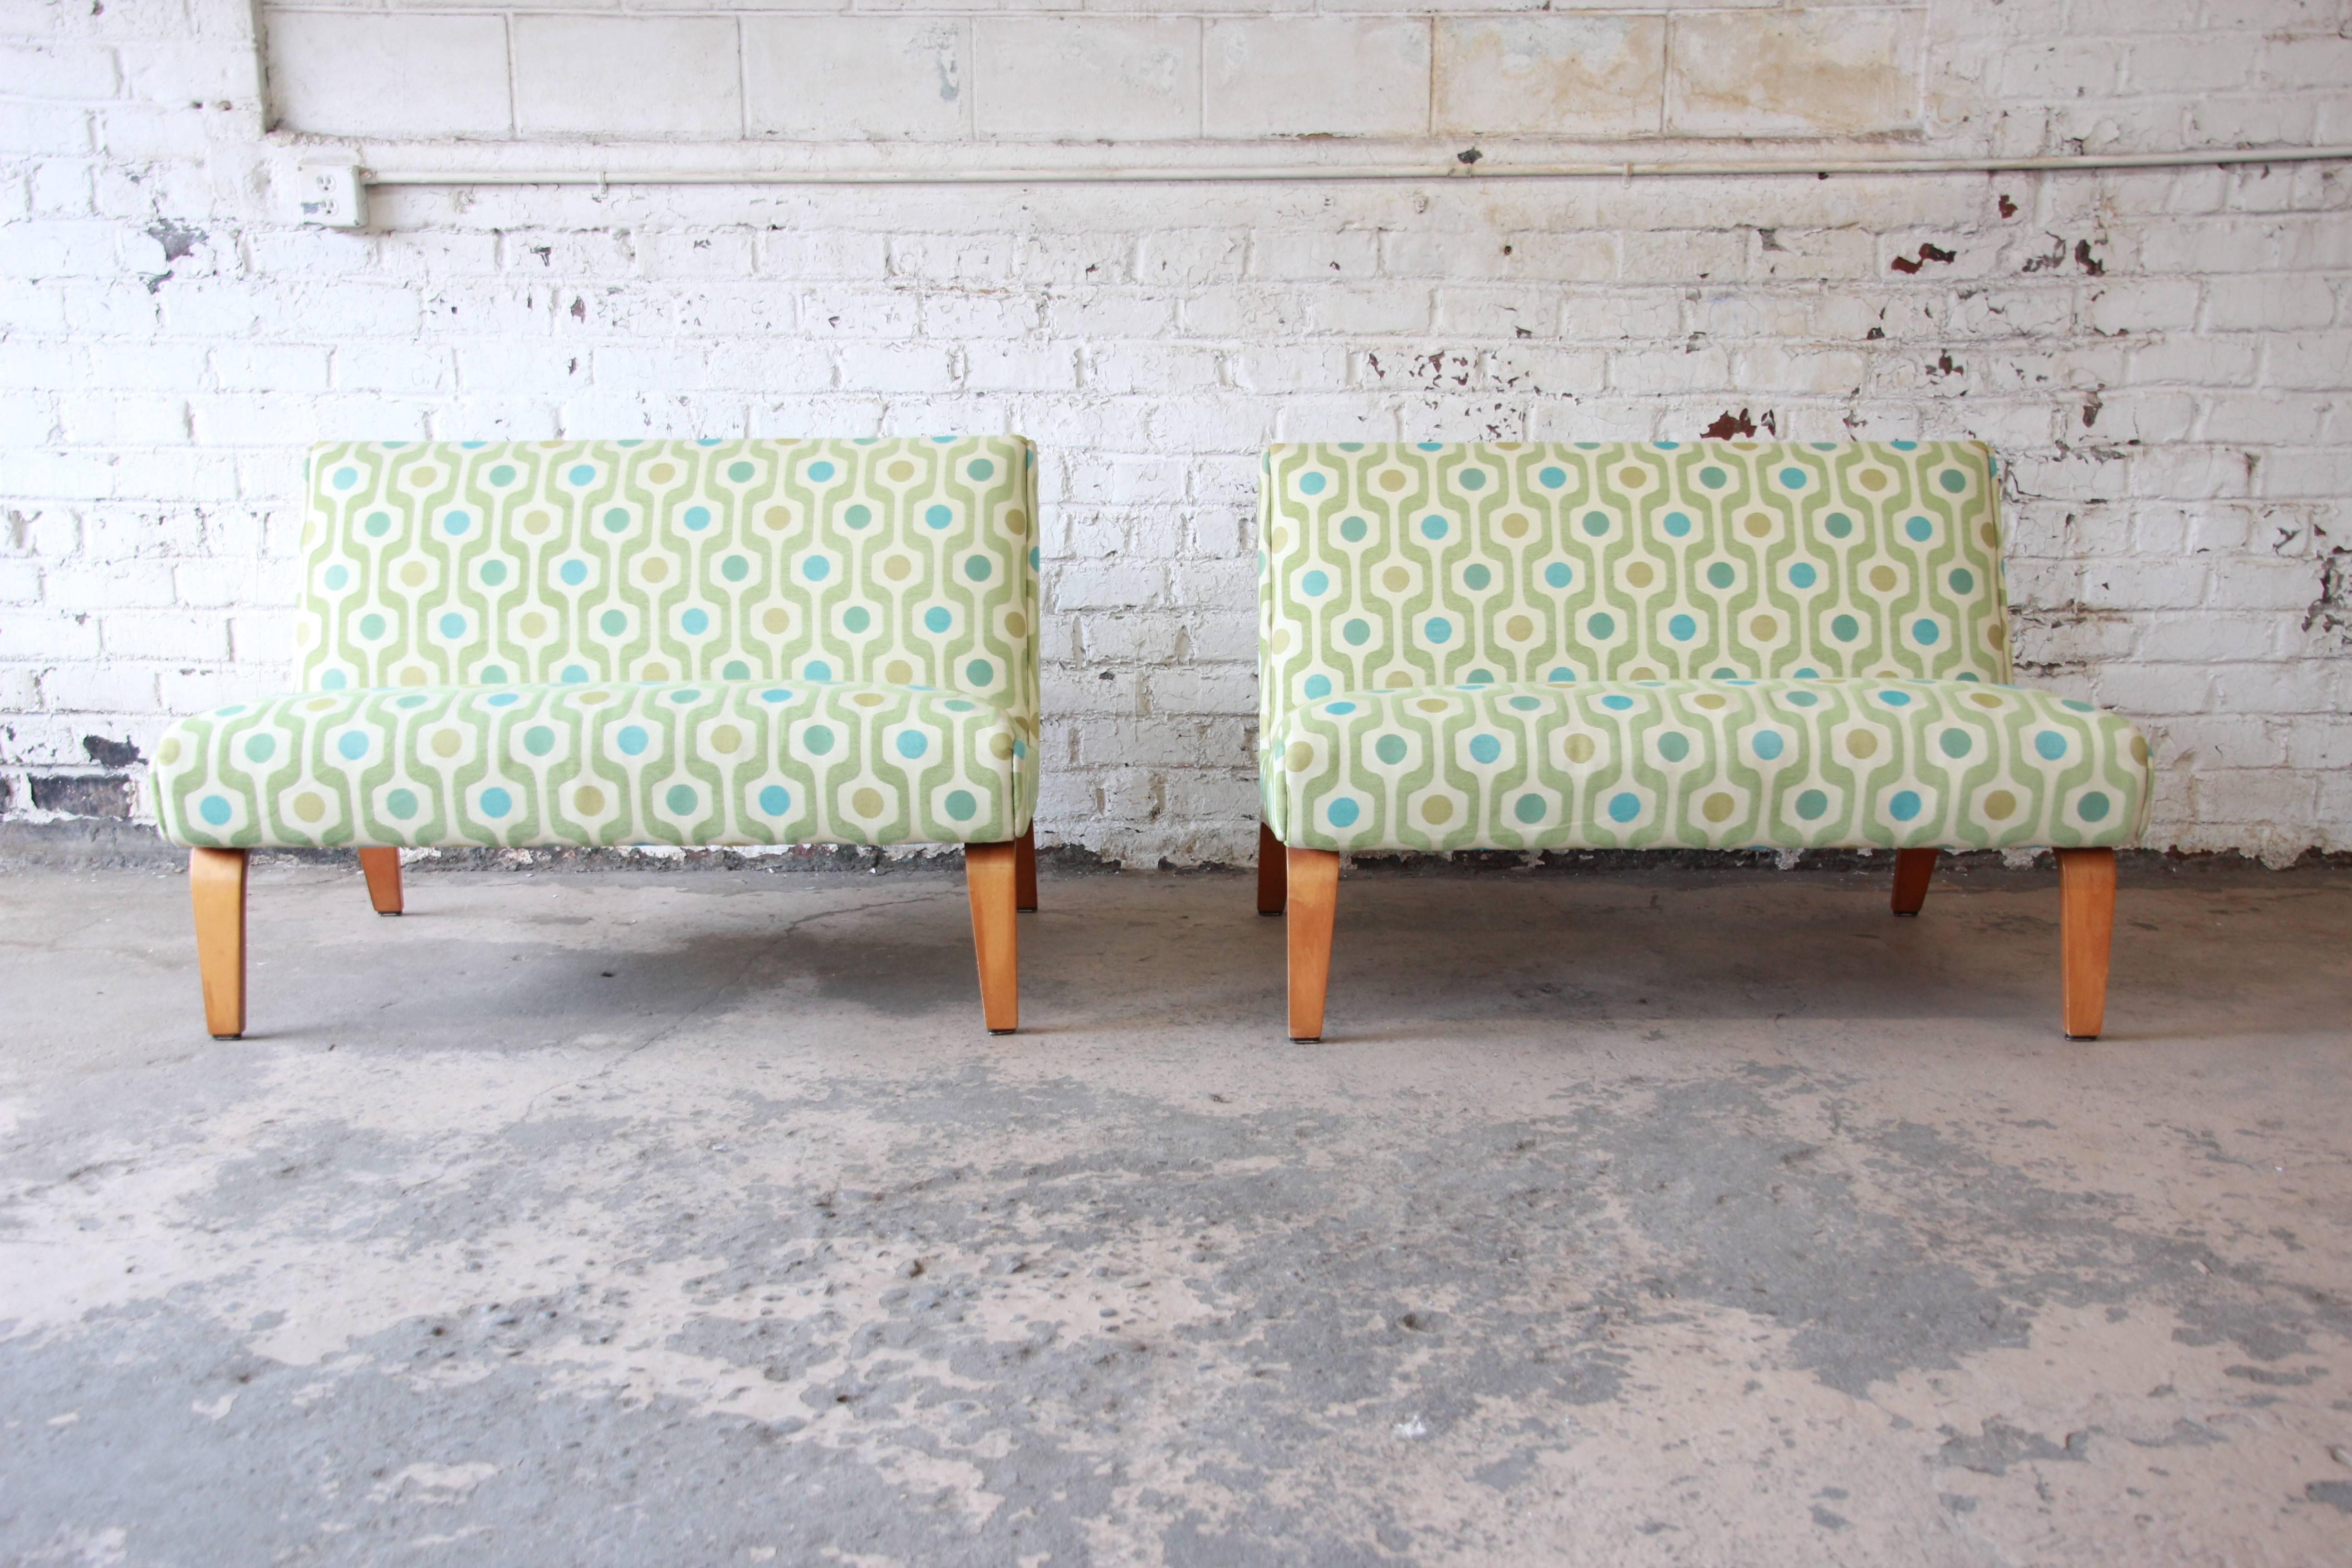 A fantastic pair of Mid-Century Modern bentwood settees by Thonet. The settees feature sleek and stylish Mid-Century design with unique bentwood legs. They have been reupholstered in a modern print within the past two years, and the upholstery is